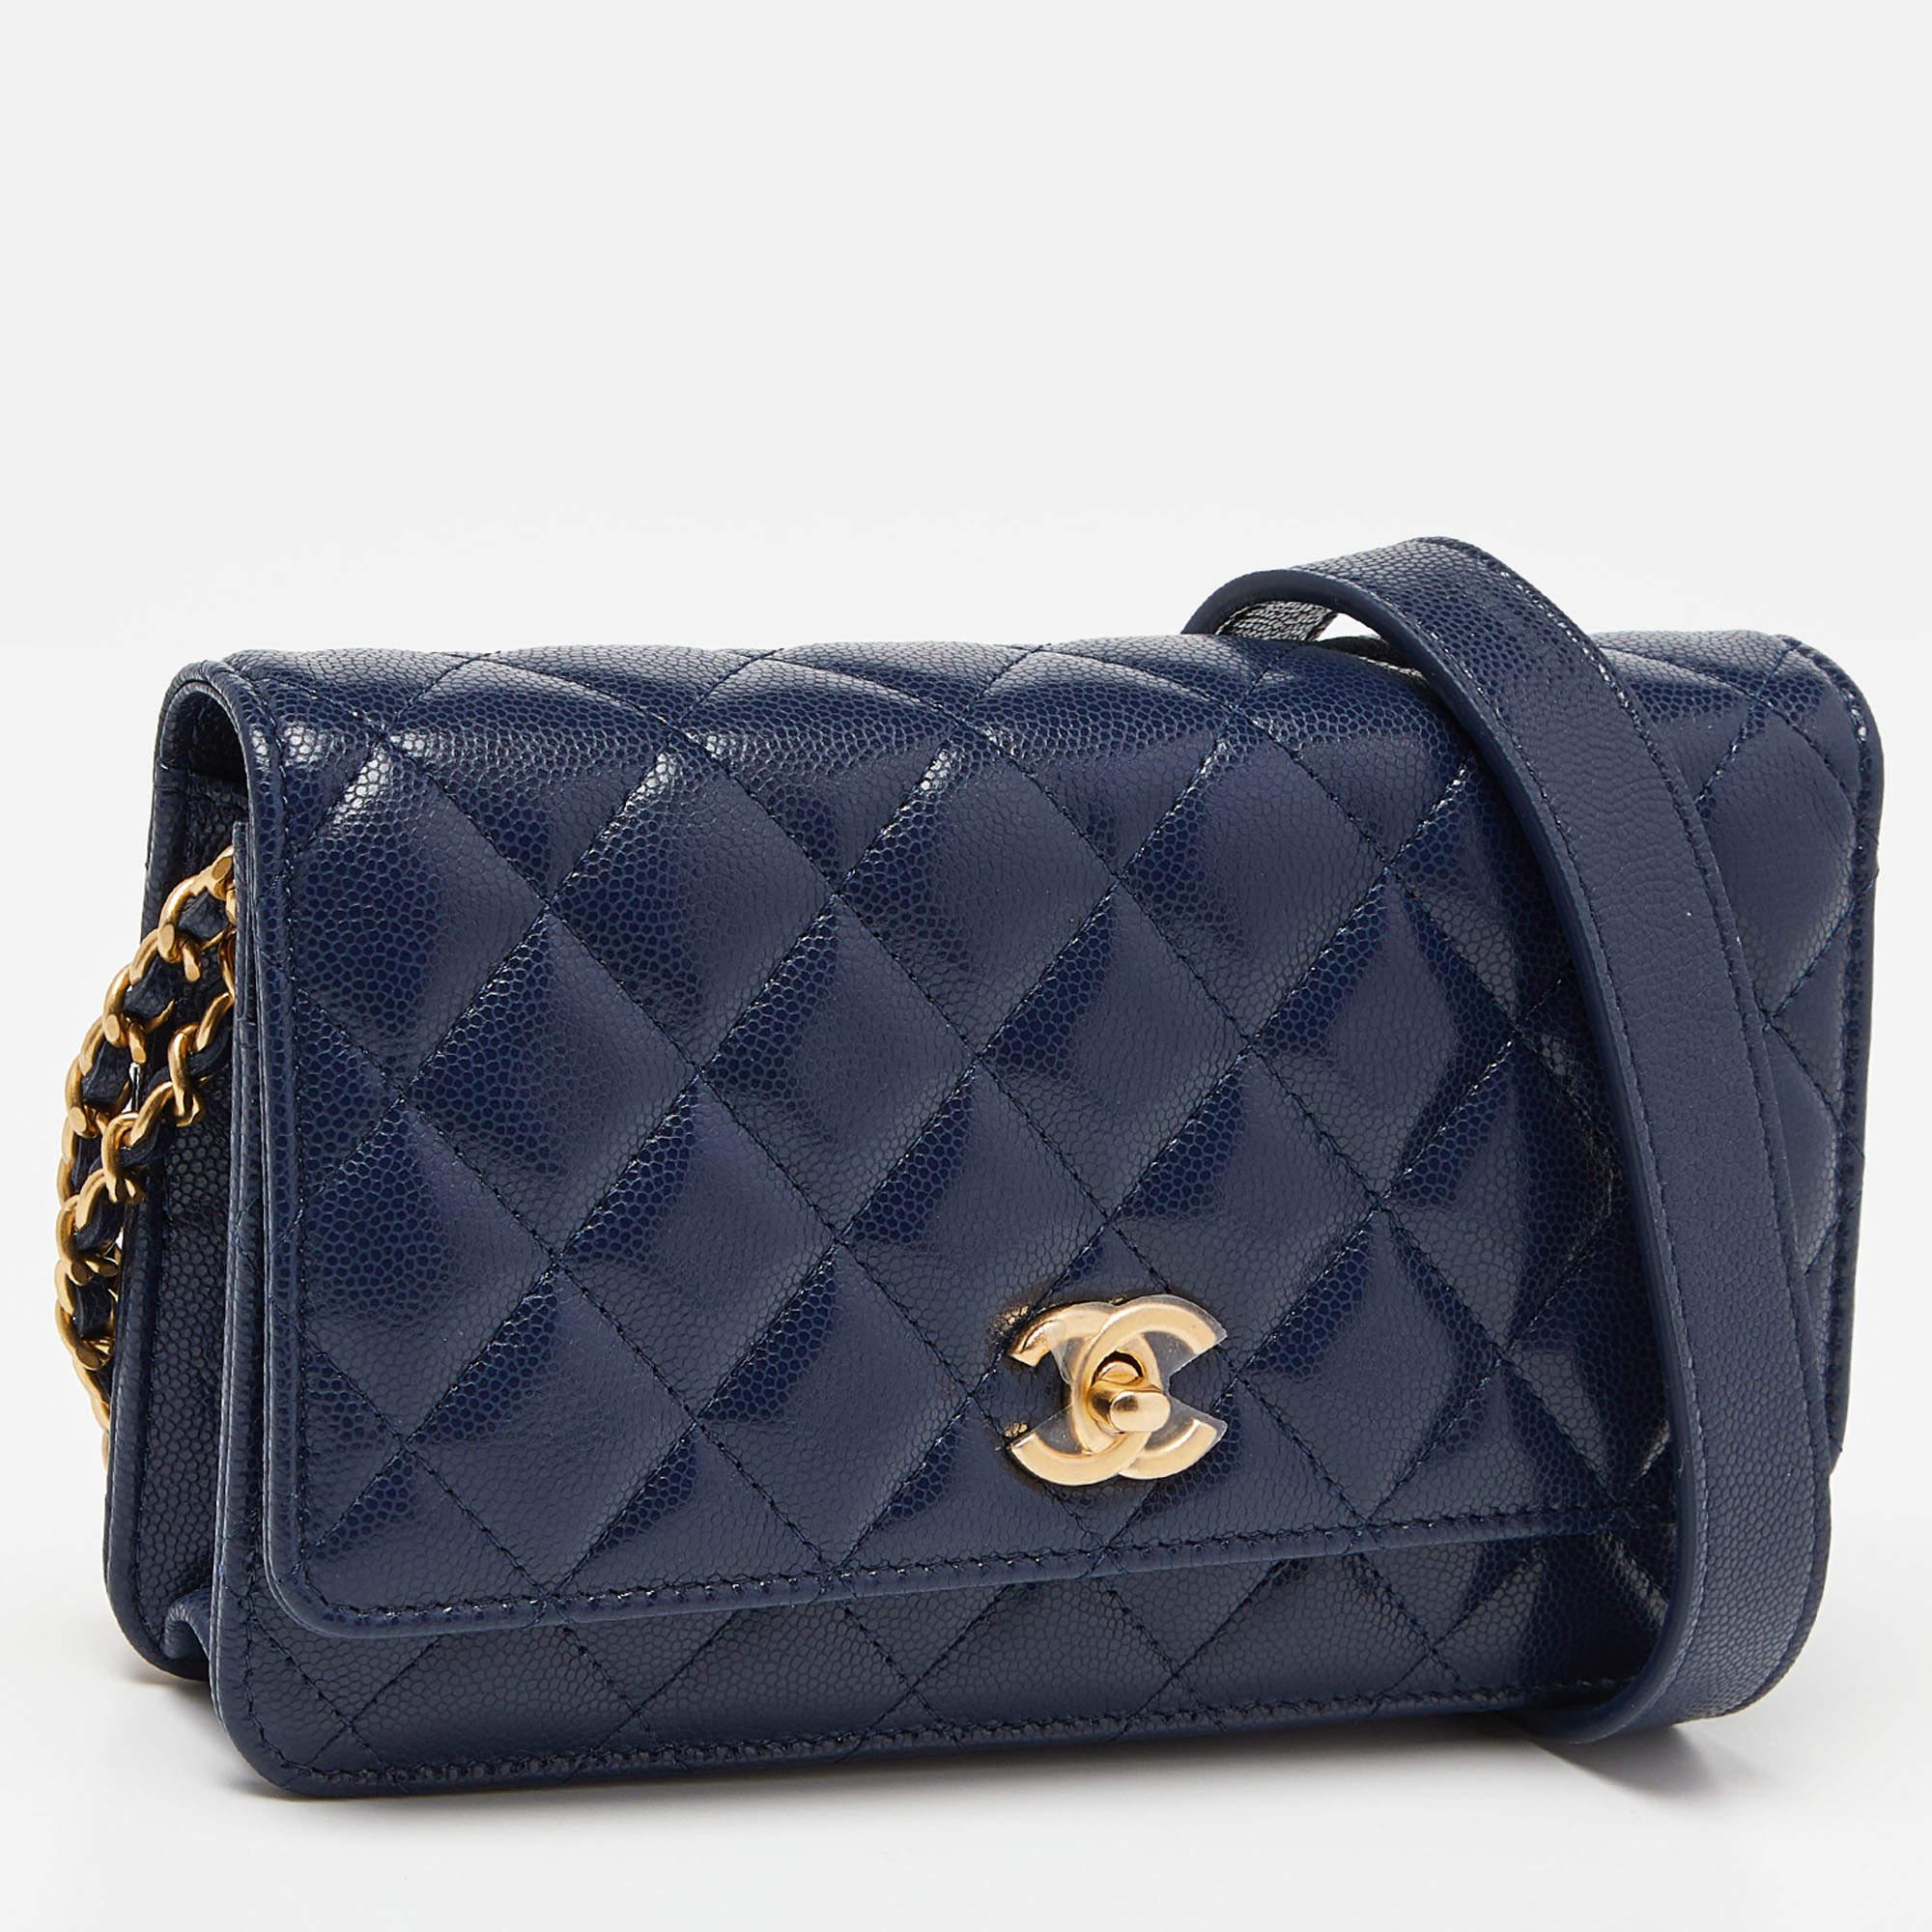 Trust this Chanel WOC to be light, durable, and comfortable to carry. Crafted from leather, it features a lined interior, a long chain strap, and the CC logo at the front.

